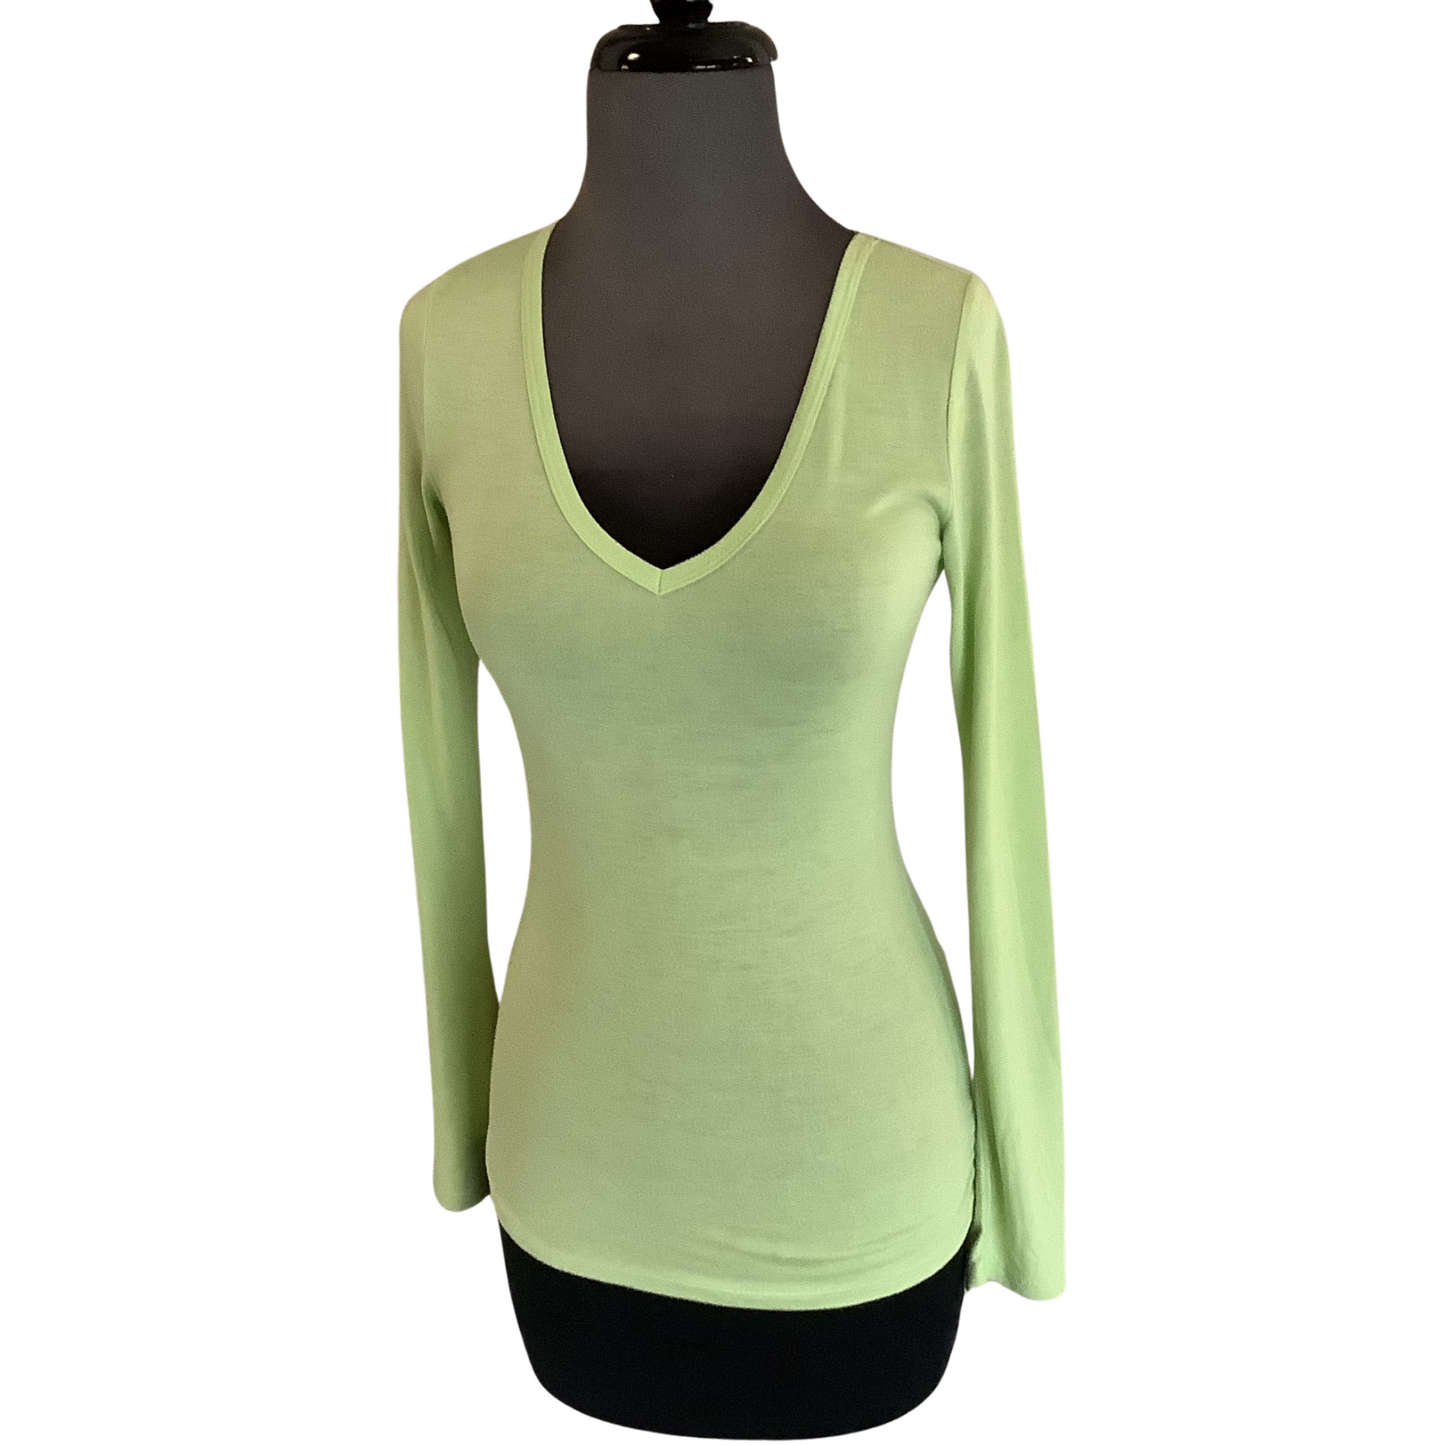 This classic Long Sleeve V-Neck Tee is perfect for any event. Featuring a vivid lime green color, a flattering V-neck and a fitted silhouette, you'll love the timeless style it adds to your wardrobe.